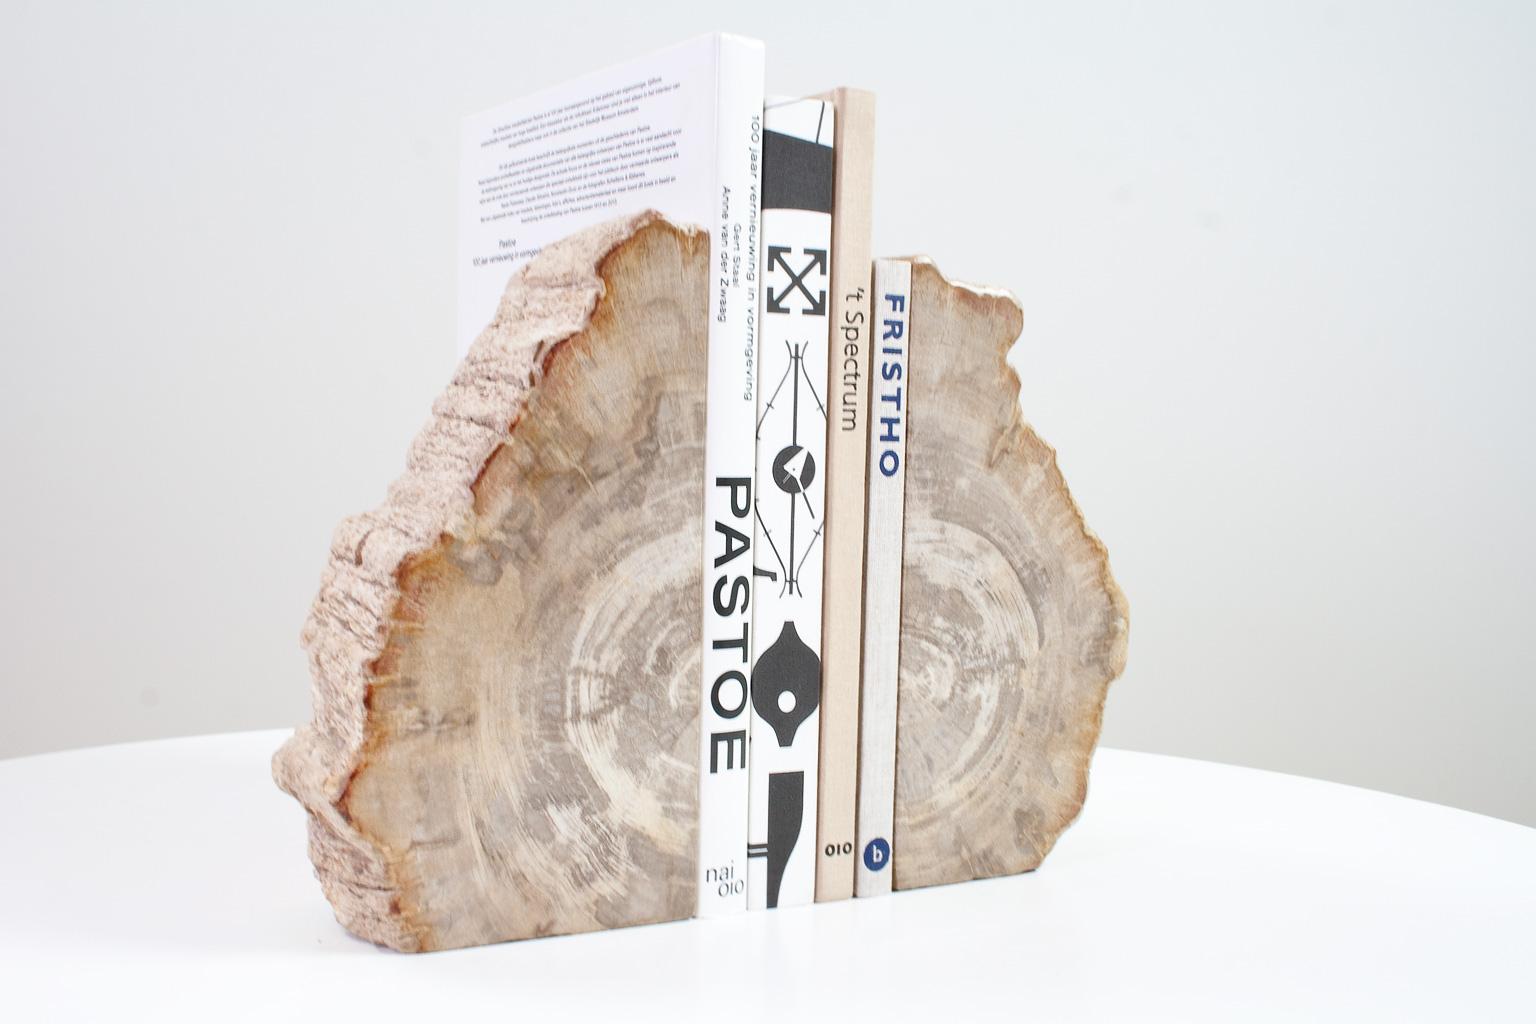 Large and heavy petrified wooden bookends, beautiful as a home accessory. Smooth sanded and polished on both sides. The contrasting charcoal grey and beige tones paired with the scale make this a lovely and unique home accessory The object still